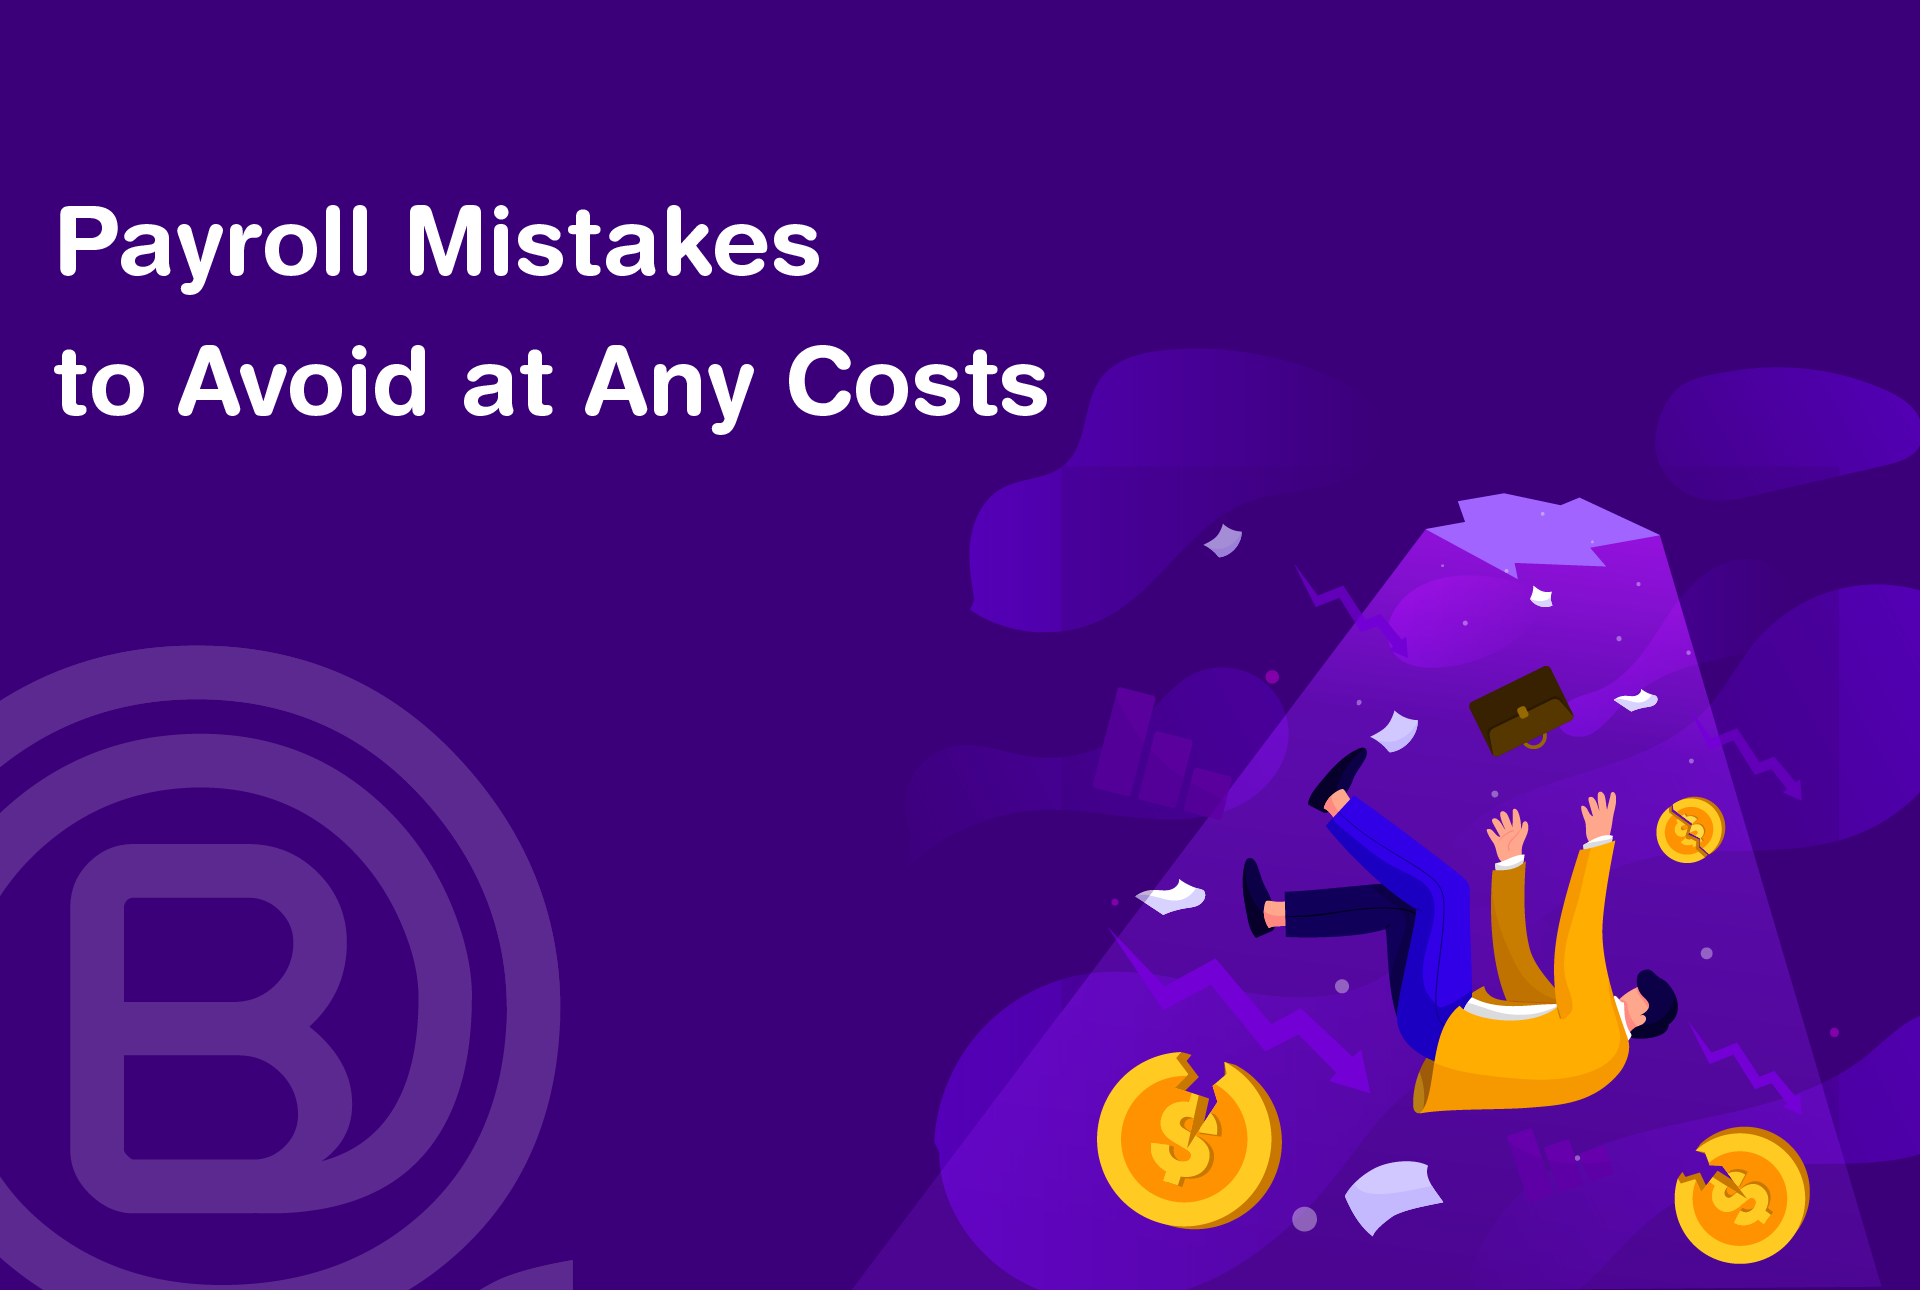 Payroll Mistakes to Avoid at Any Costs